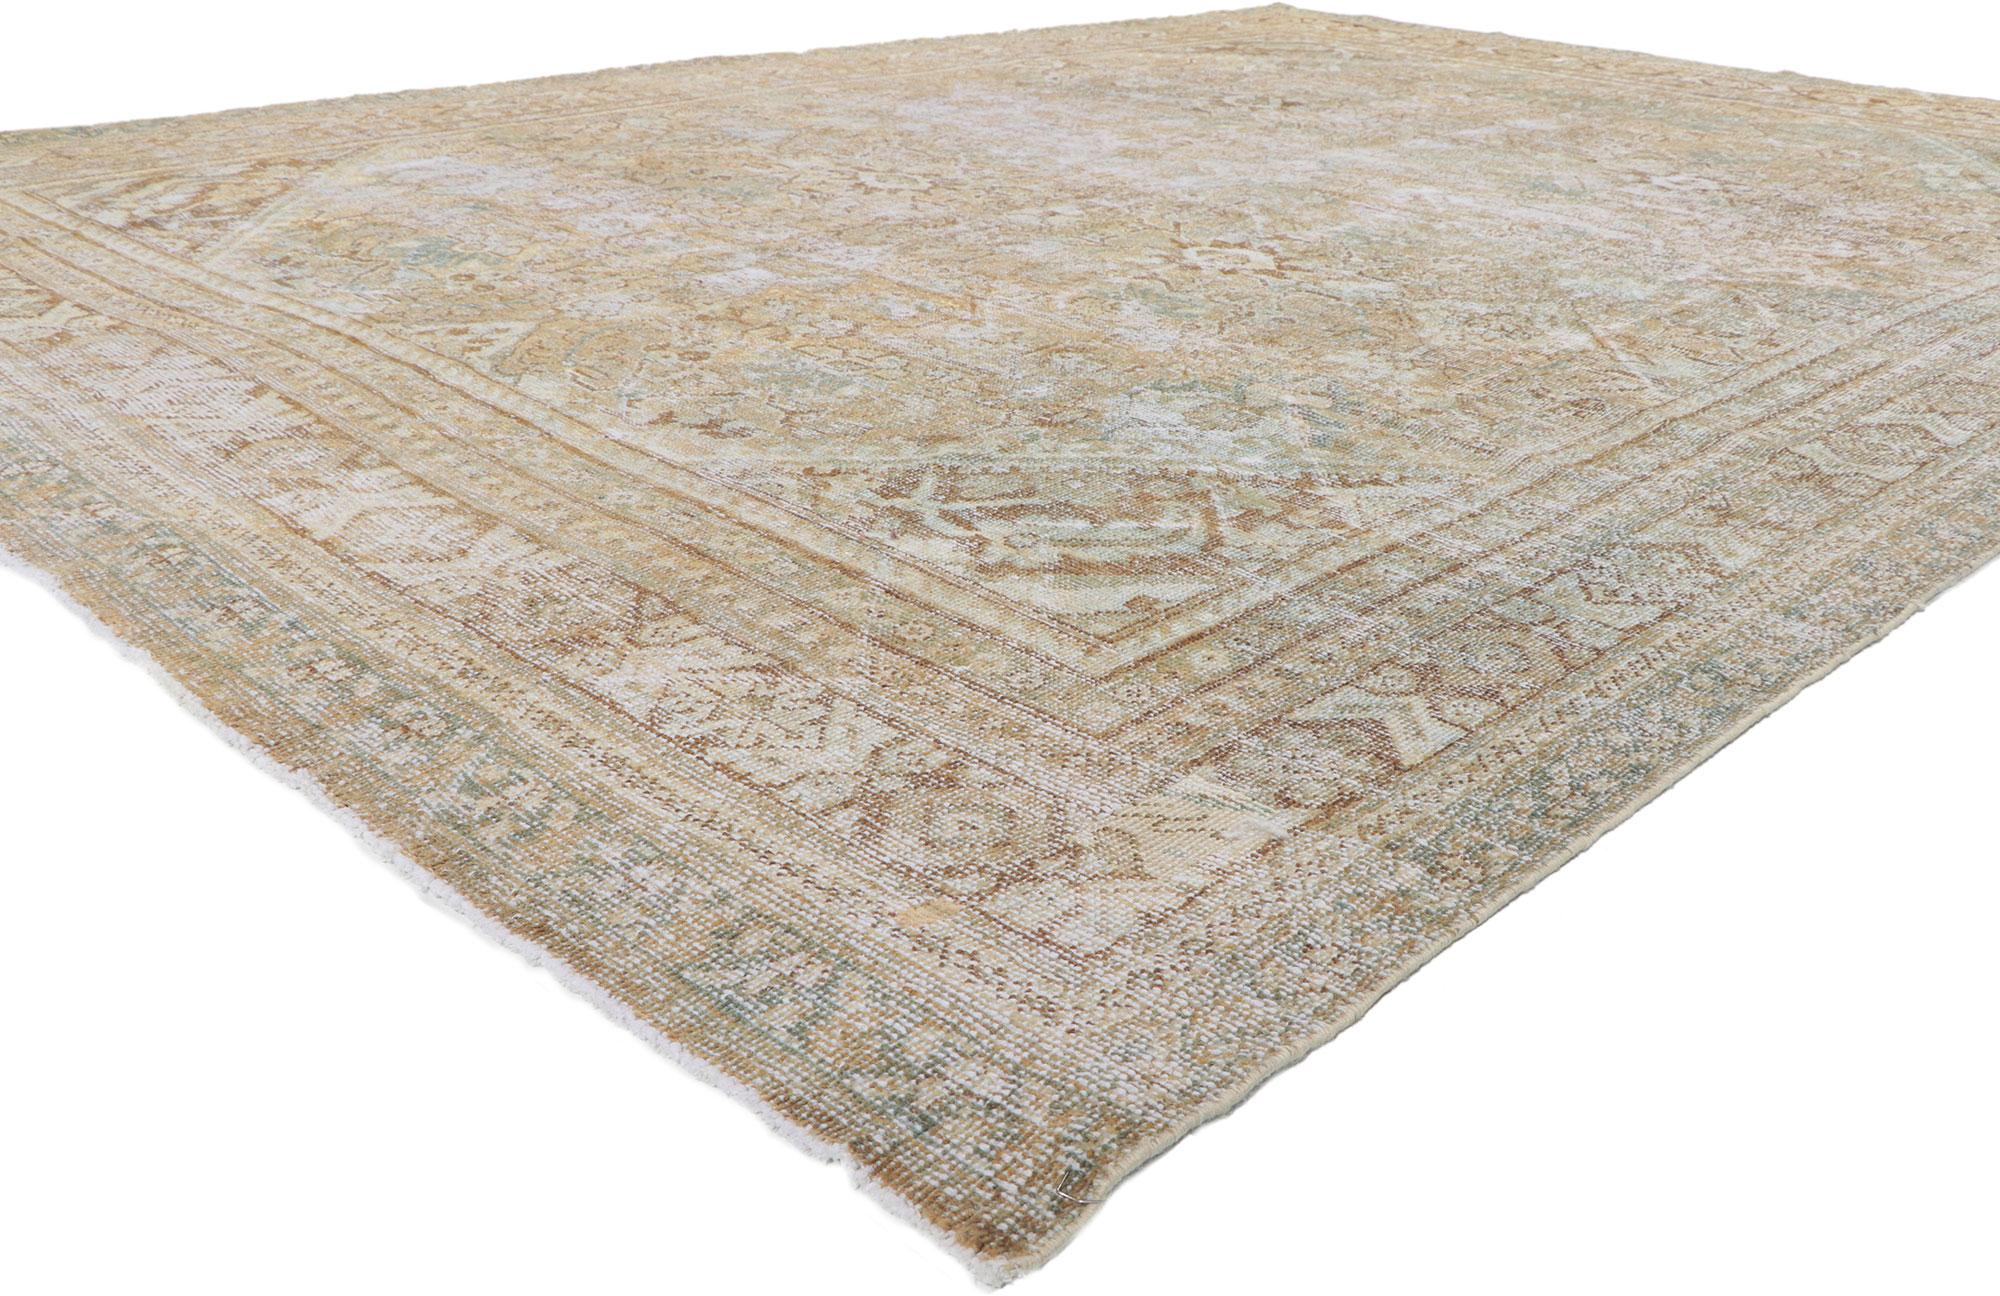 61170 distressed antique Persian mahal rug 09'00 x 12'06.
Emanating traditional sensibility and rugged beauty with an earthy colorway, this hand-knotted wool antique Persian Mahal rug creates an inimitable warmth and calming ambiance. The all-over